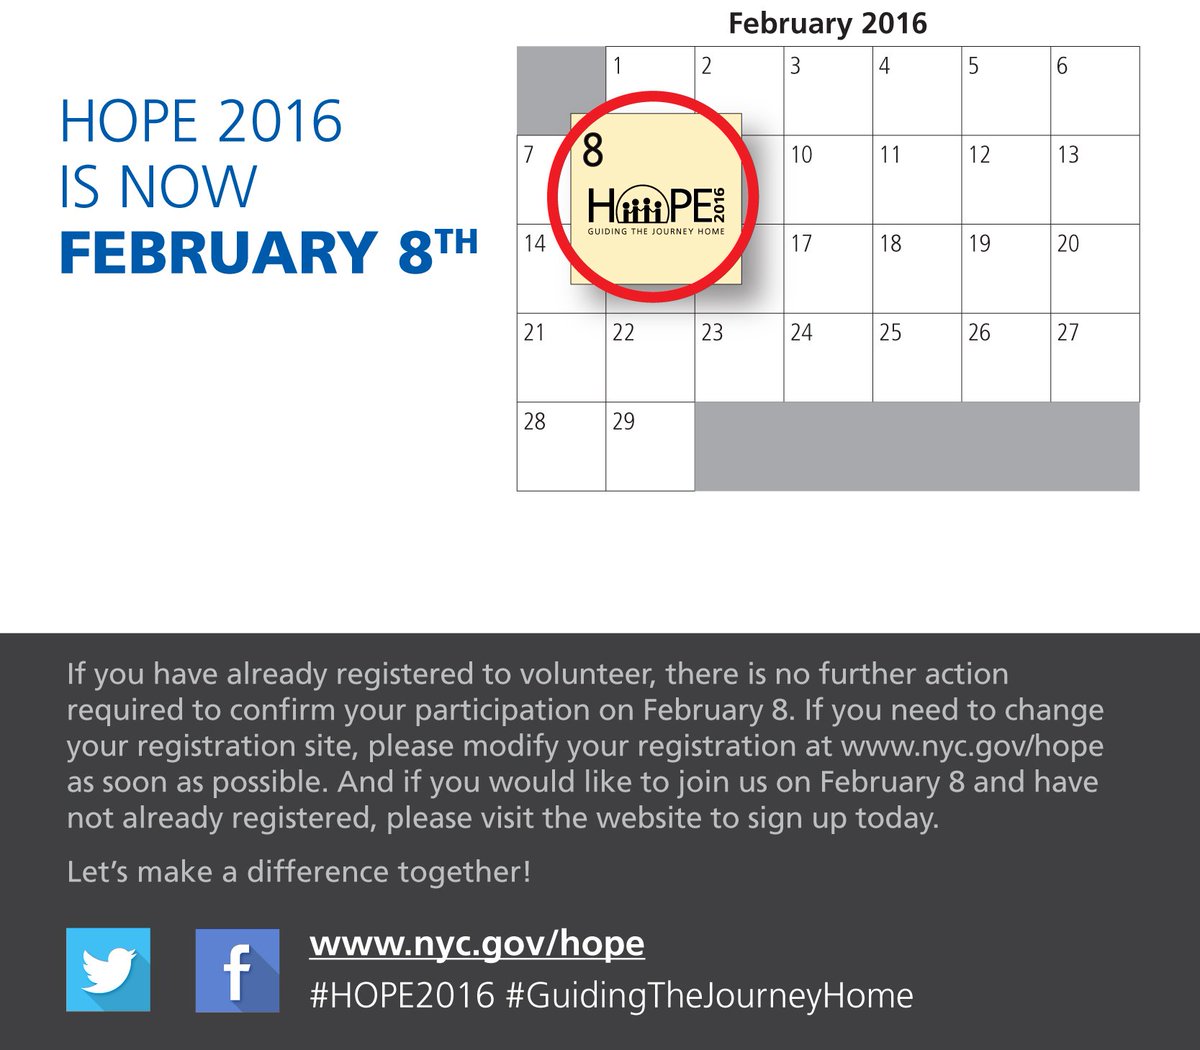 RT @NYCDHS: #HOPE2016 is Monday, February 8th, and your participation is more vital than ever. Join us! https://t.co/hcUCknkR01 https://t.c…